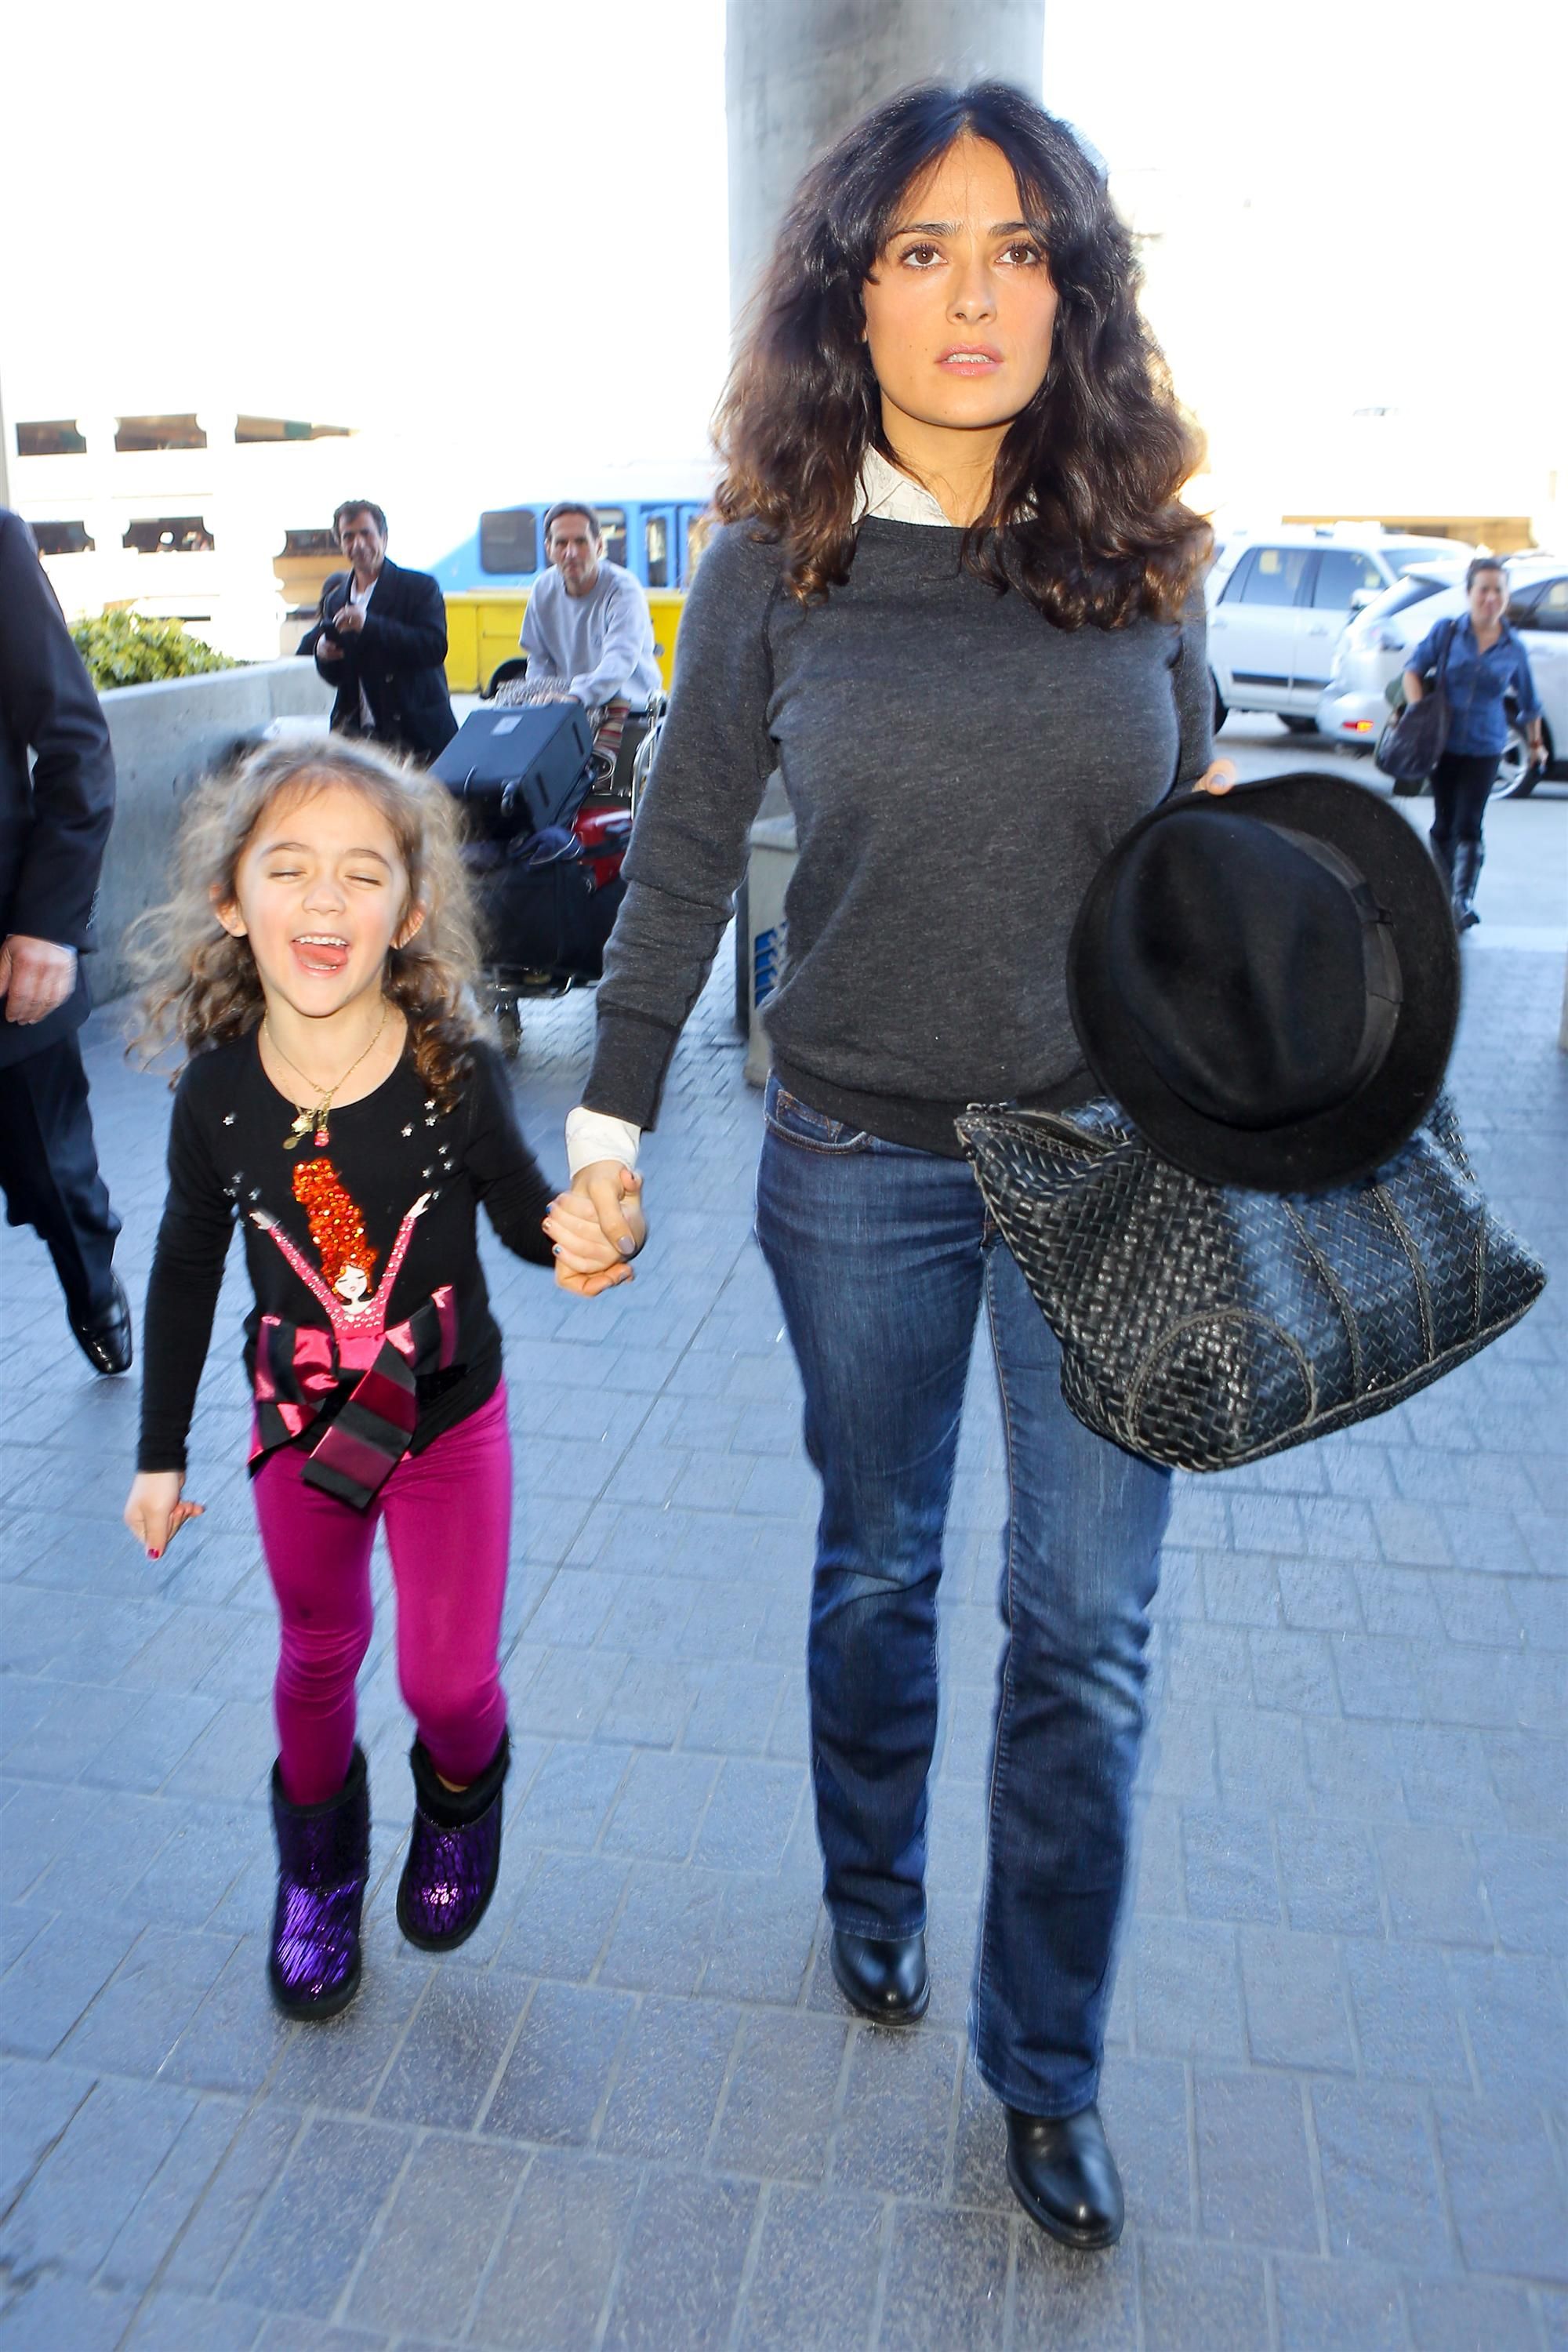 Salma Hayek was spotted at LAX Airport in Los Angeles 17.1.2013 